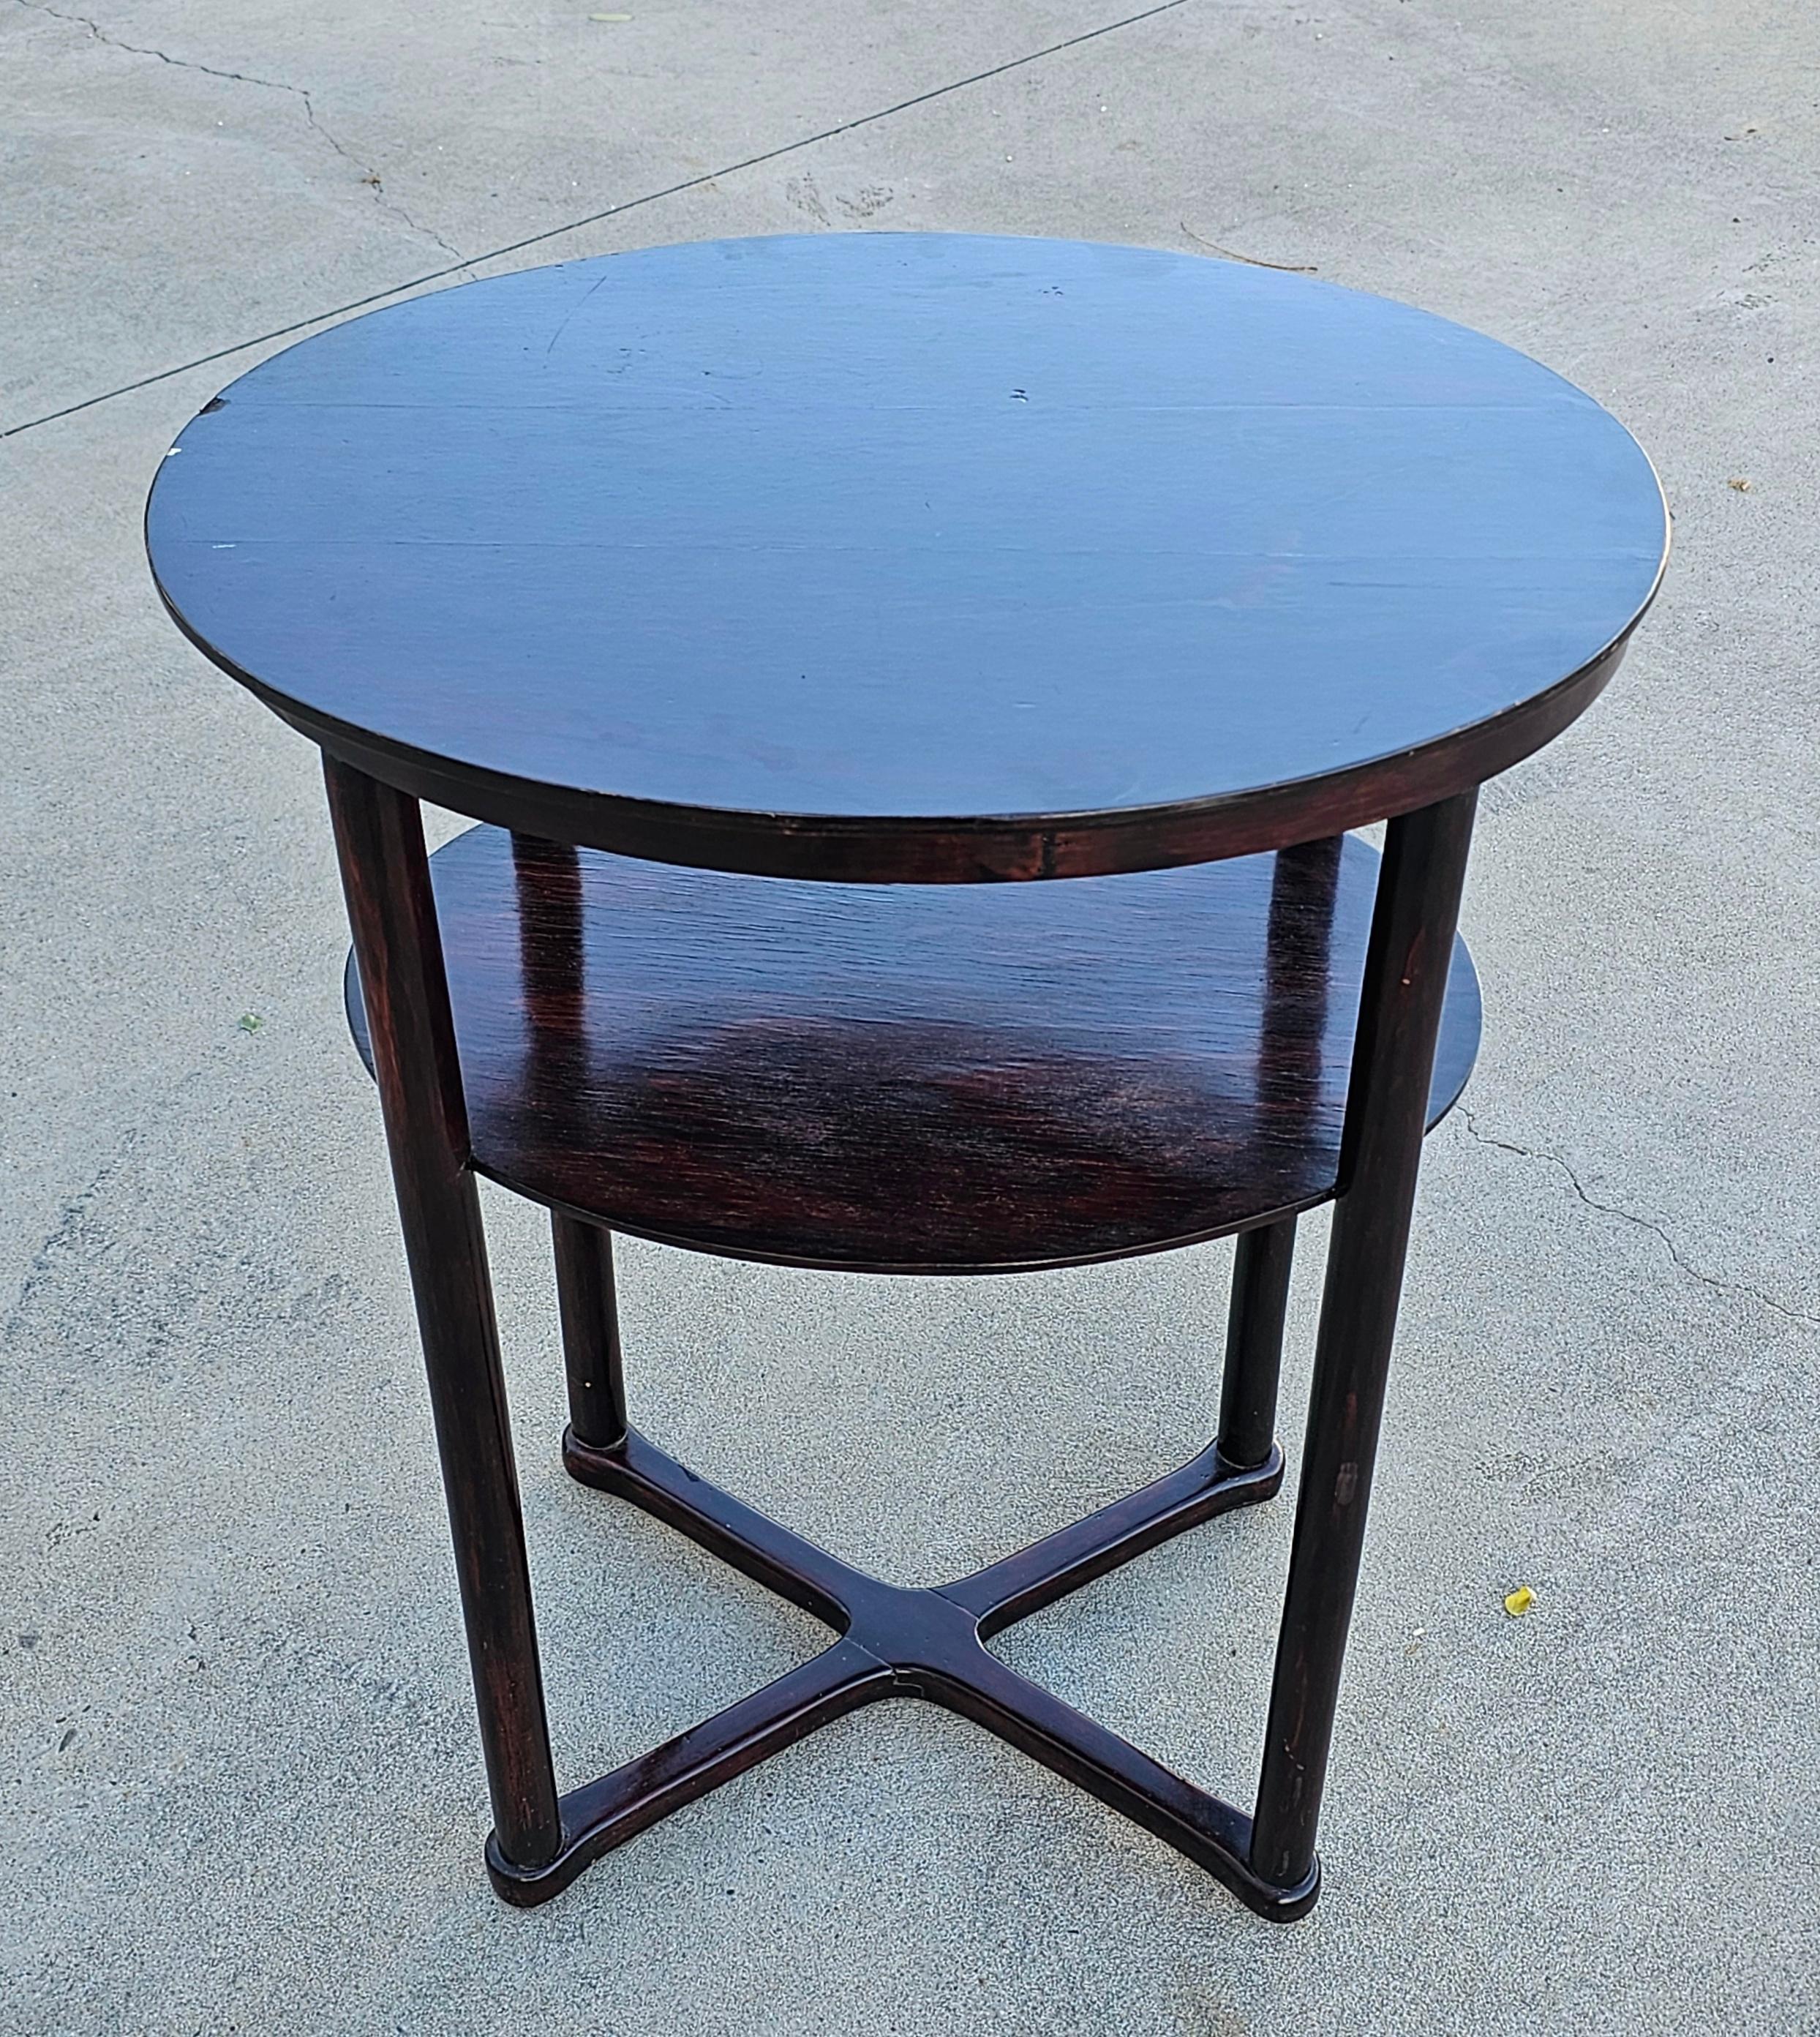 Vienna Secession Oval Side Table Model 960/2 designed by Josef Hoffmann, 1910s For Sale 4